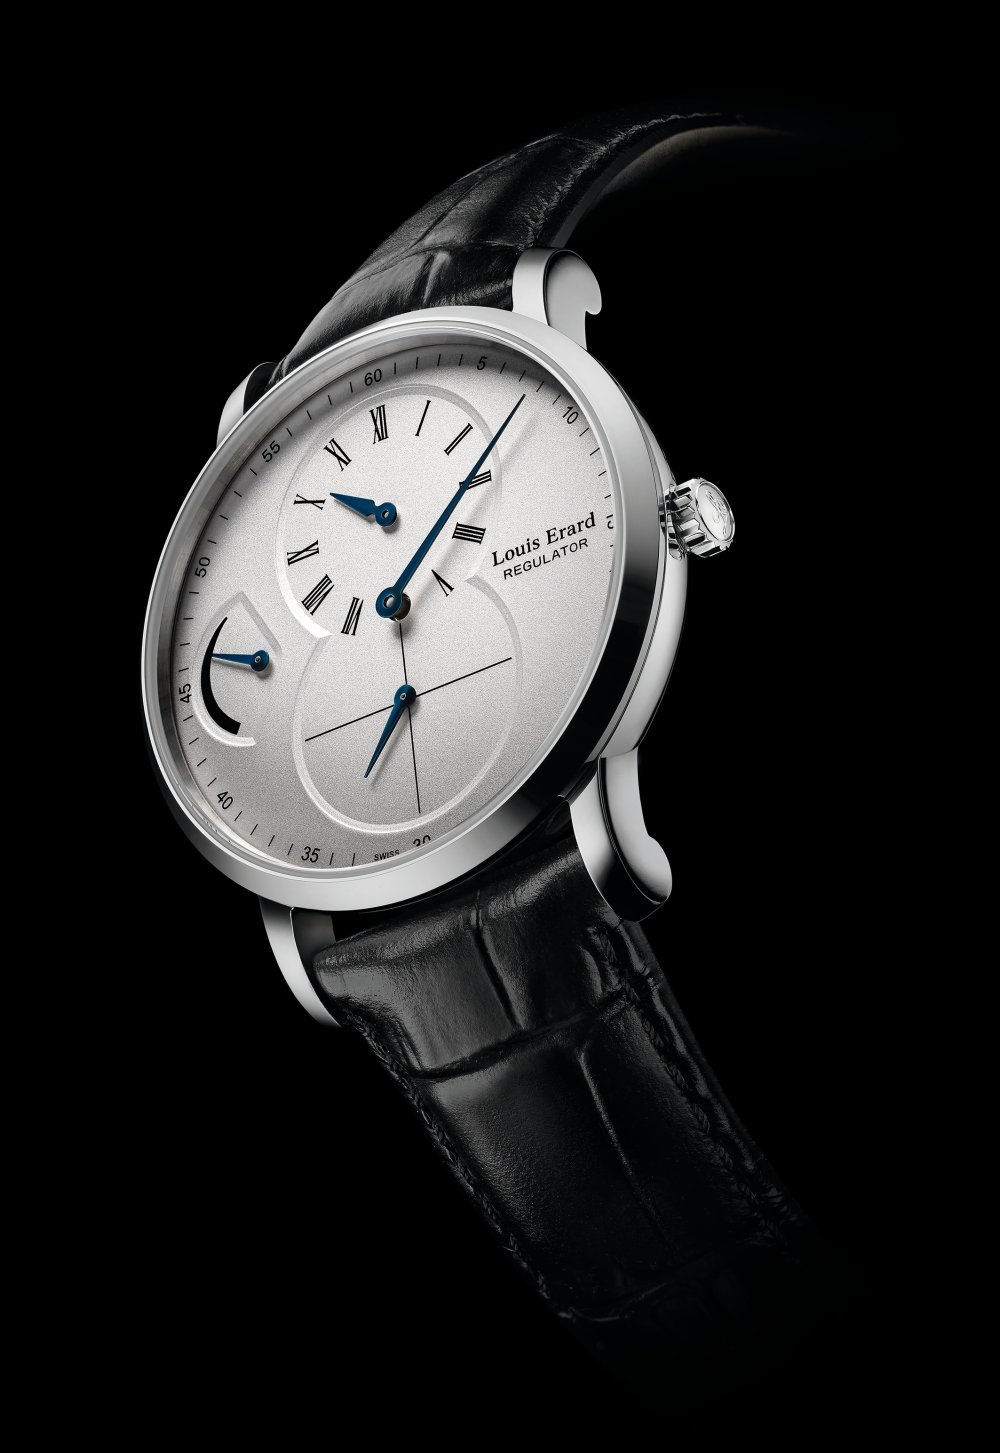 Louis Erard - Excellence Regulator Guilloché, Time and Watches